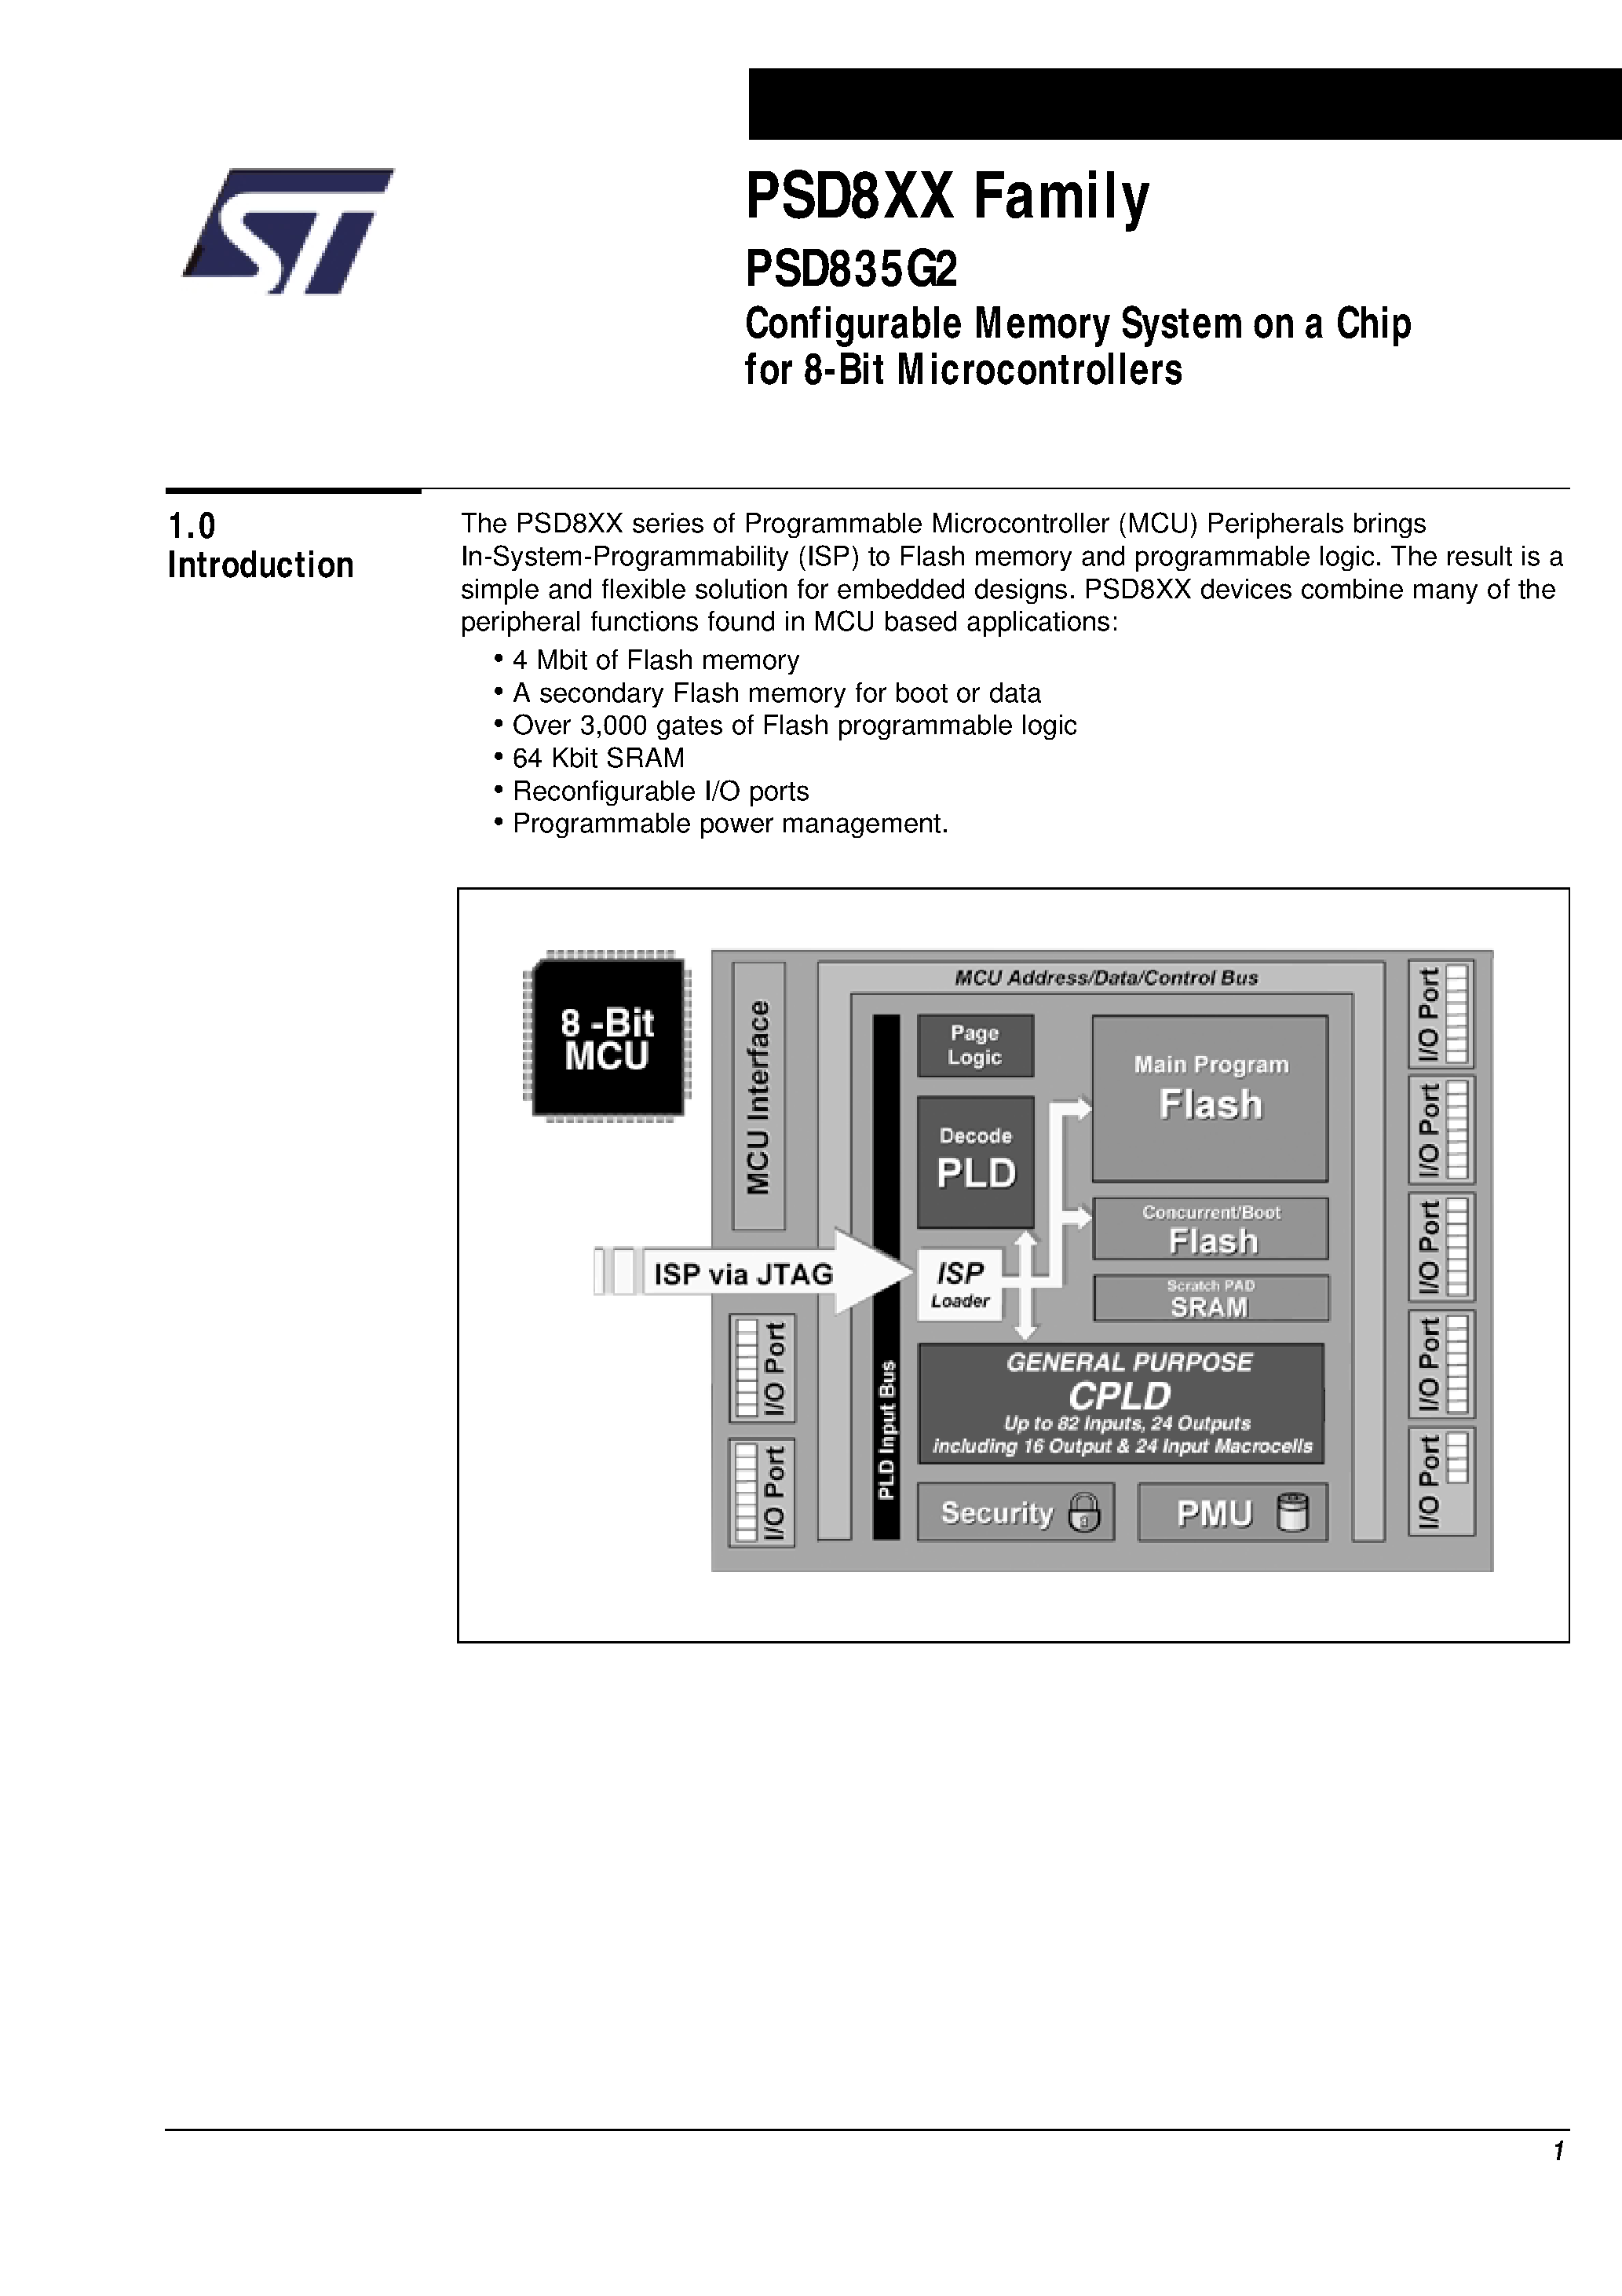 Datasheet PSD835F1V-A-20M - Configurable Memory System on a Chip for 8-Bit Microcontrollers page 2